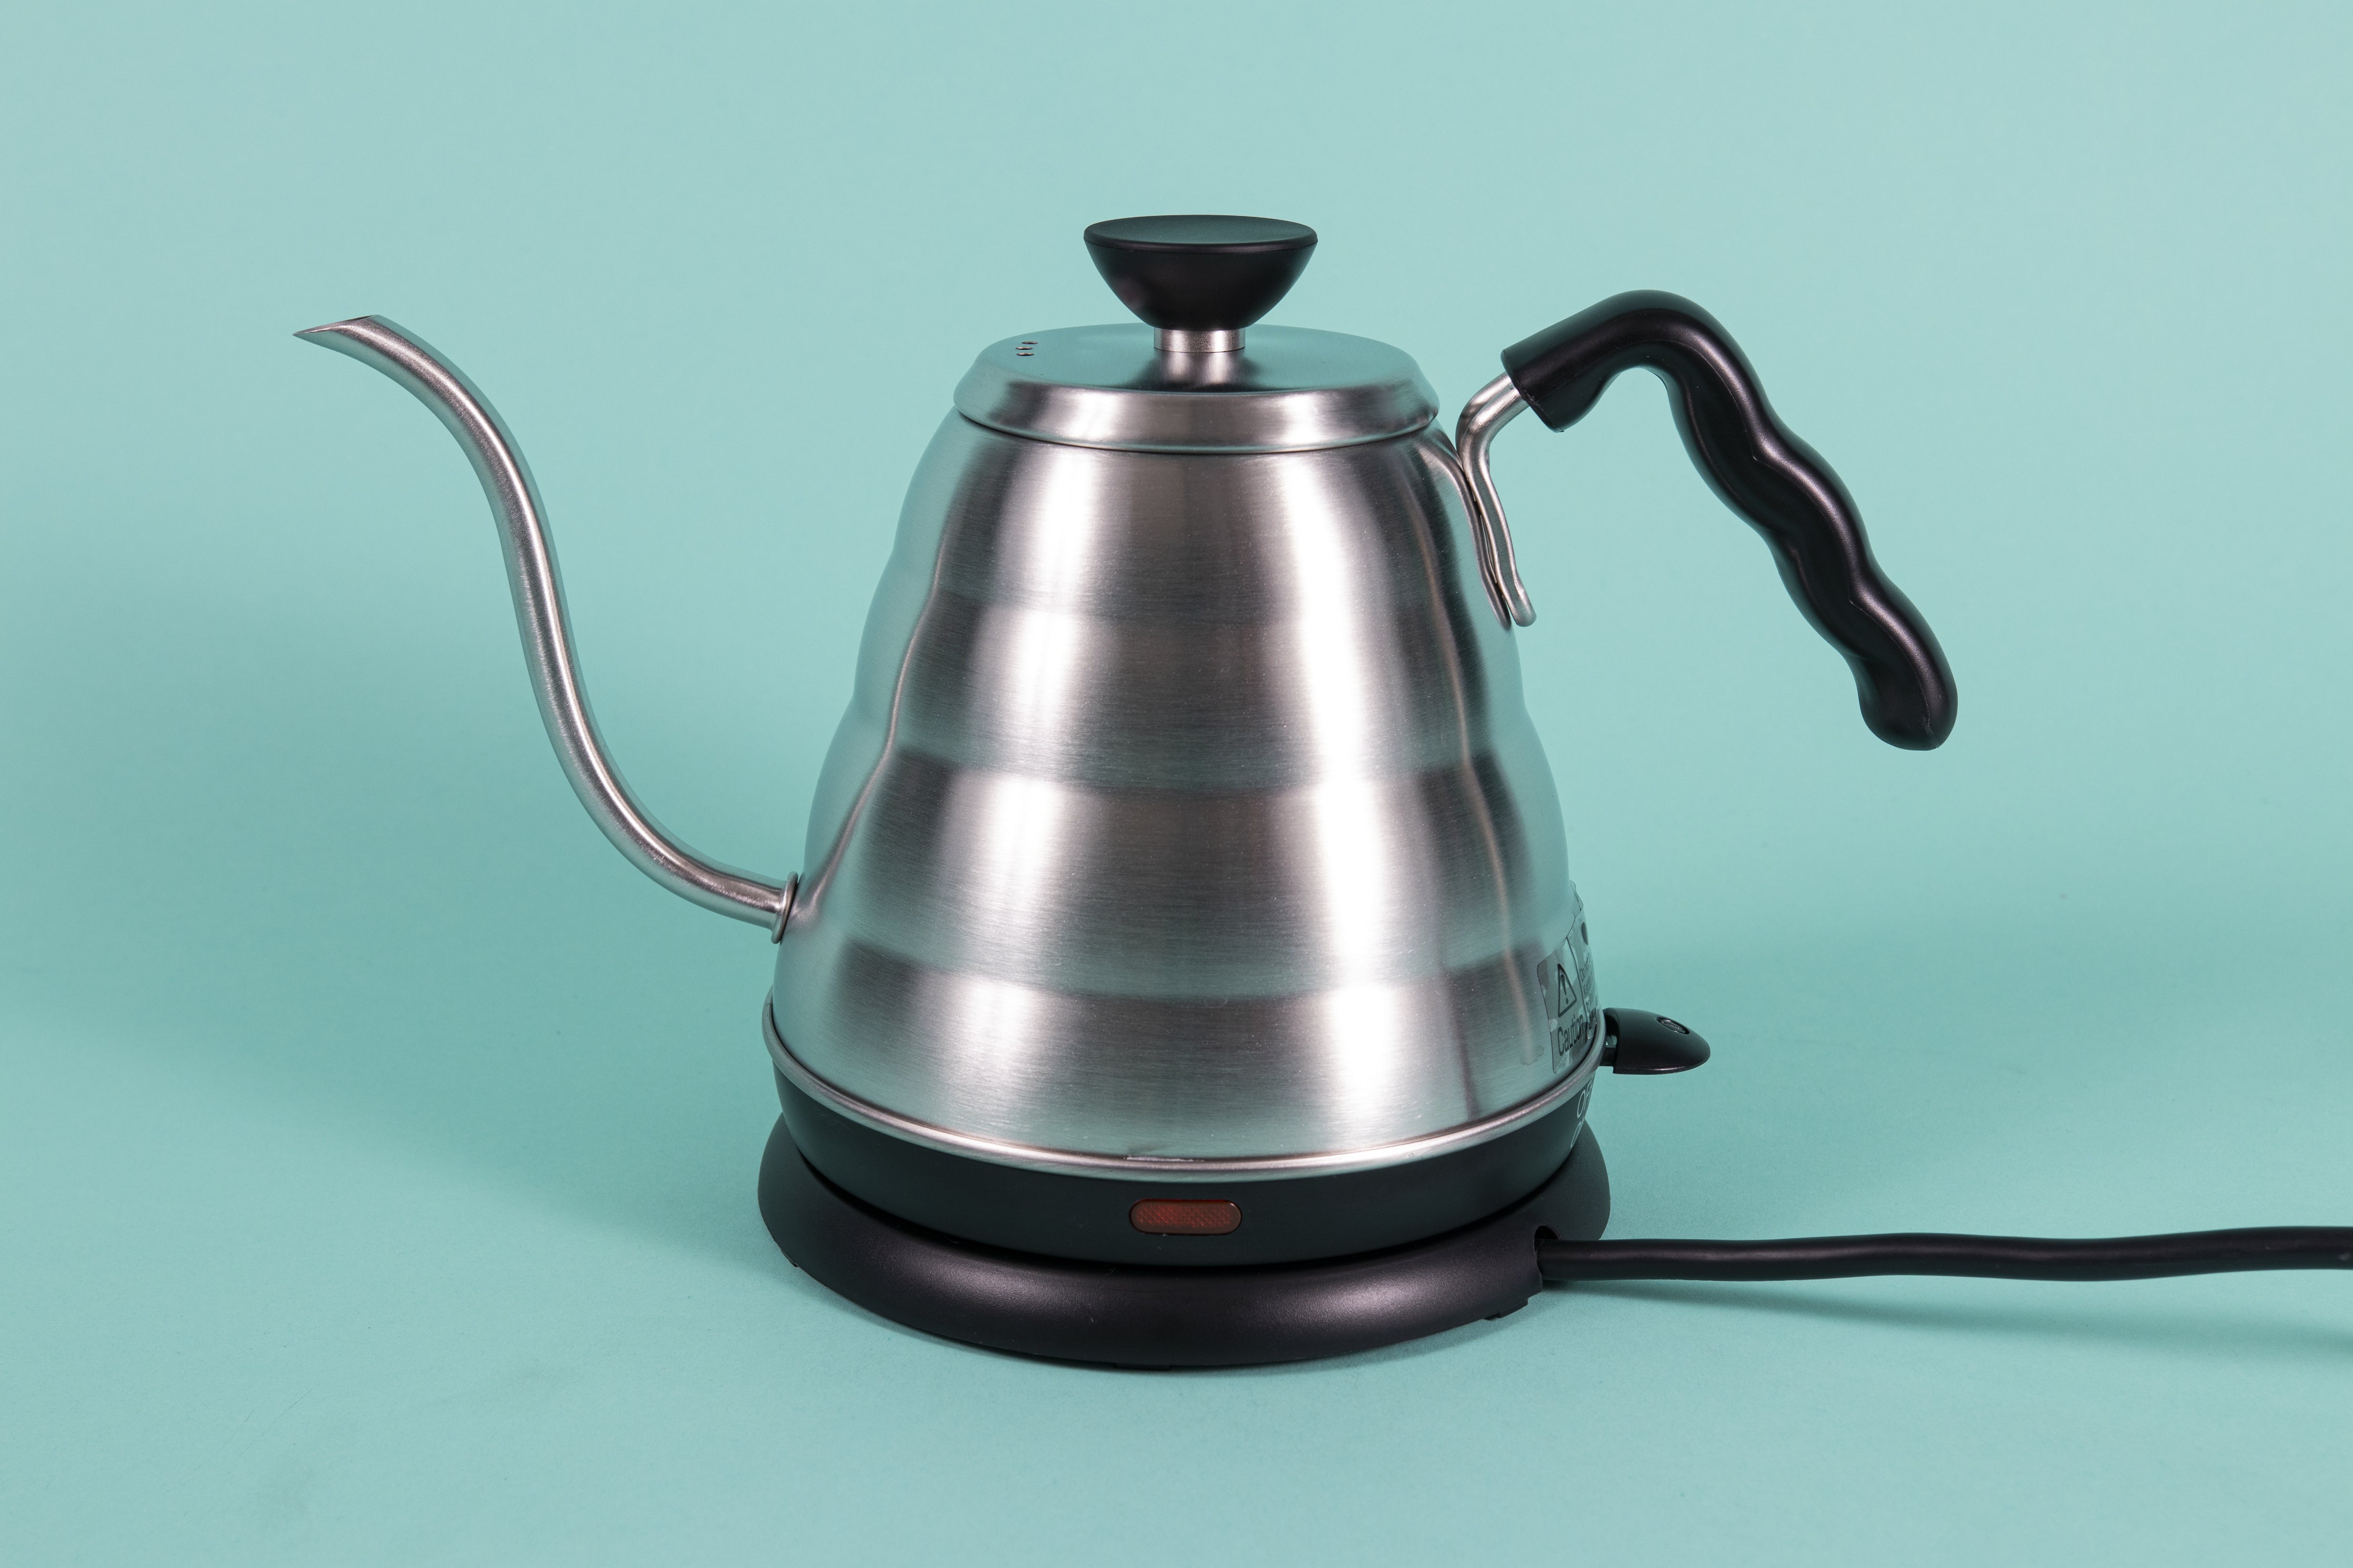 Electric Kettle Vs. Stovetop Kettle - Which One You Should Buy